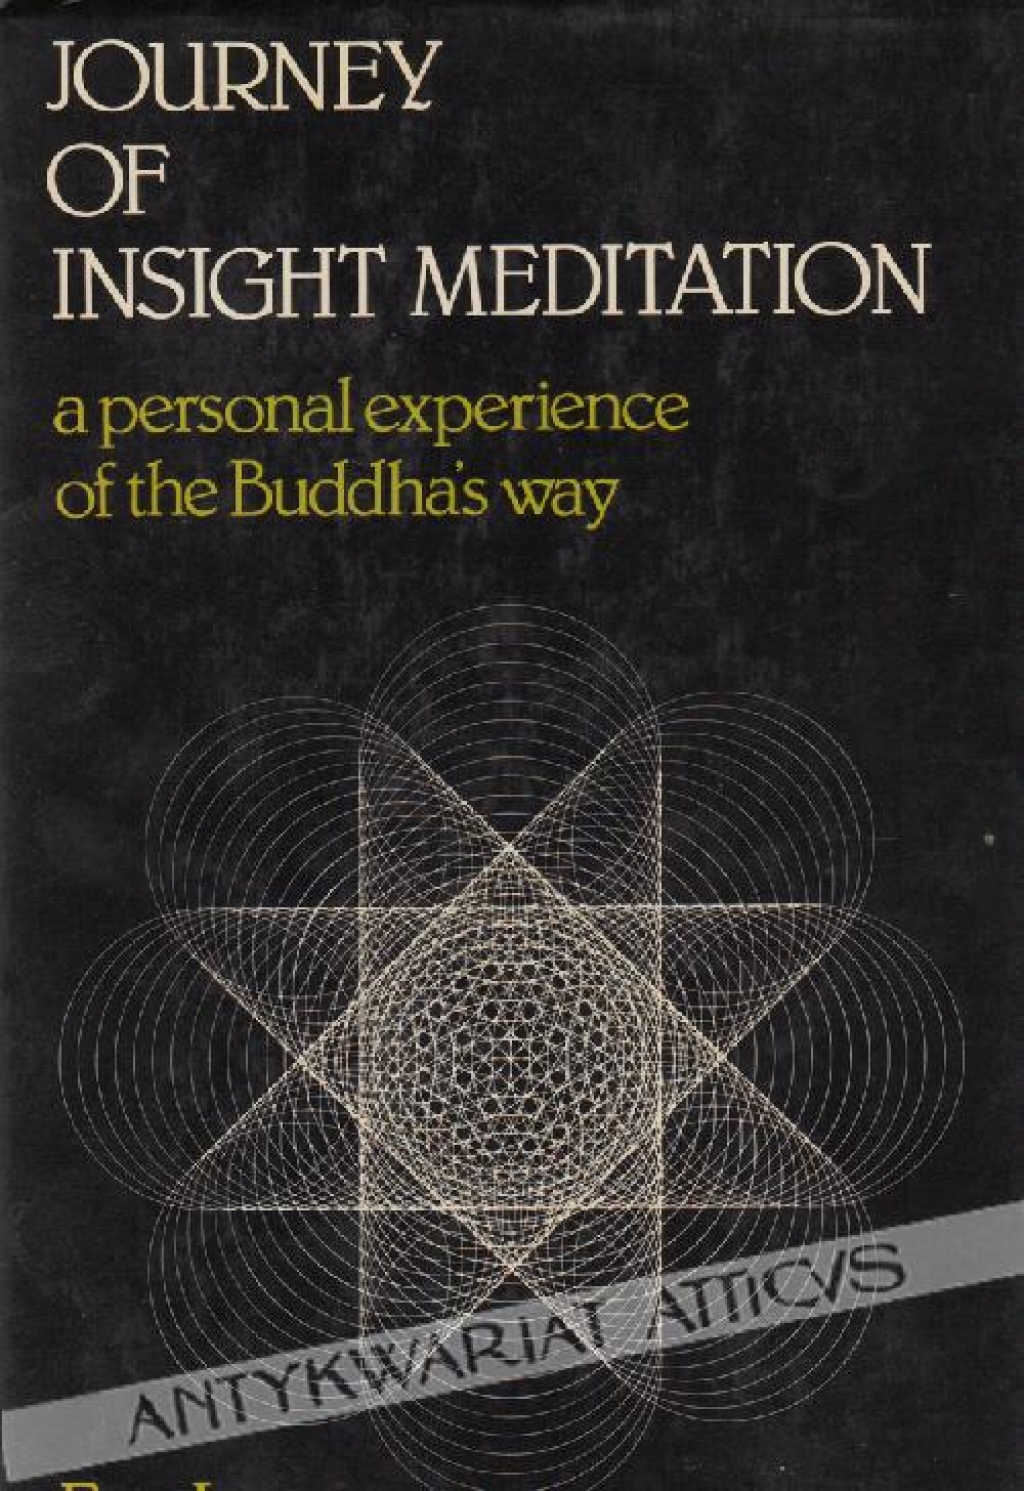 Journey of Insight Meditation. A personal experienceof the Buddha's way